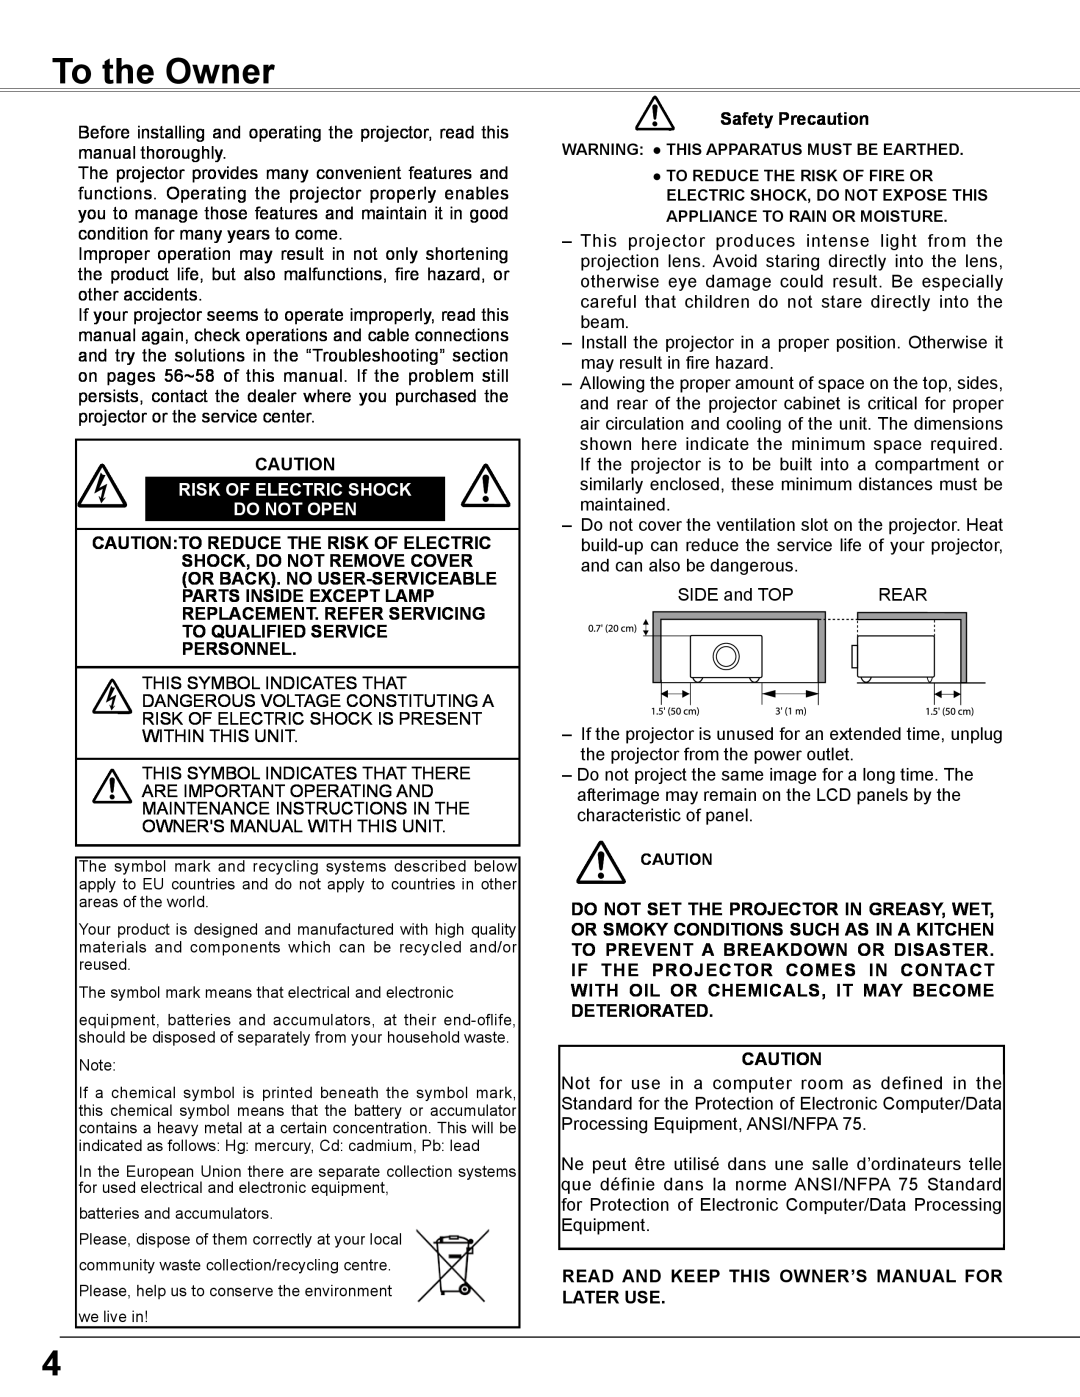 Sanyo PLC-WXL46 owner manual To the Owner, Risk Of Electric Shock Do Not Open, Safety Precaution 